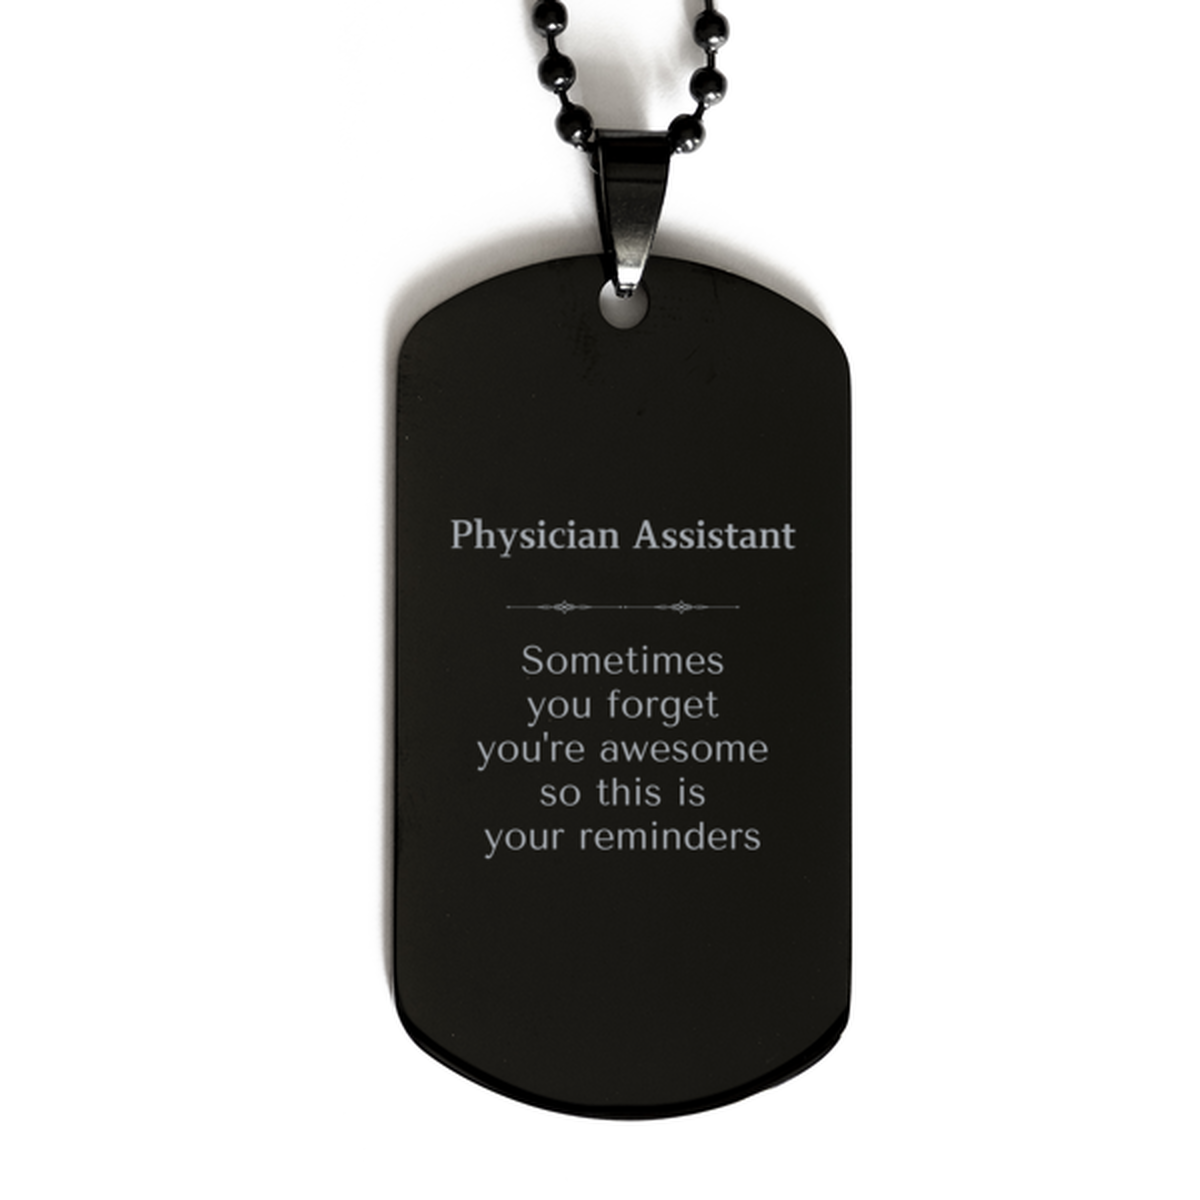 Sentimental Physician Assistant Black Dog Tag, Physician Assistant Sometimes you forget you're awesome so this is your reminders, Graduation Christmas Birthday Gifts for Physician Assistant, Men, Women, Coworkers